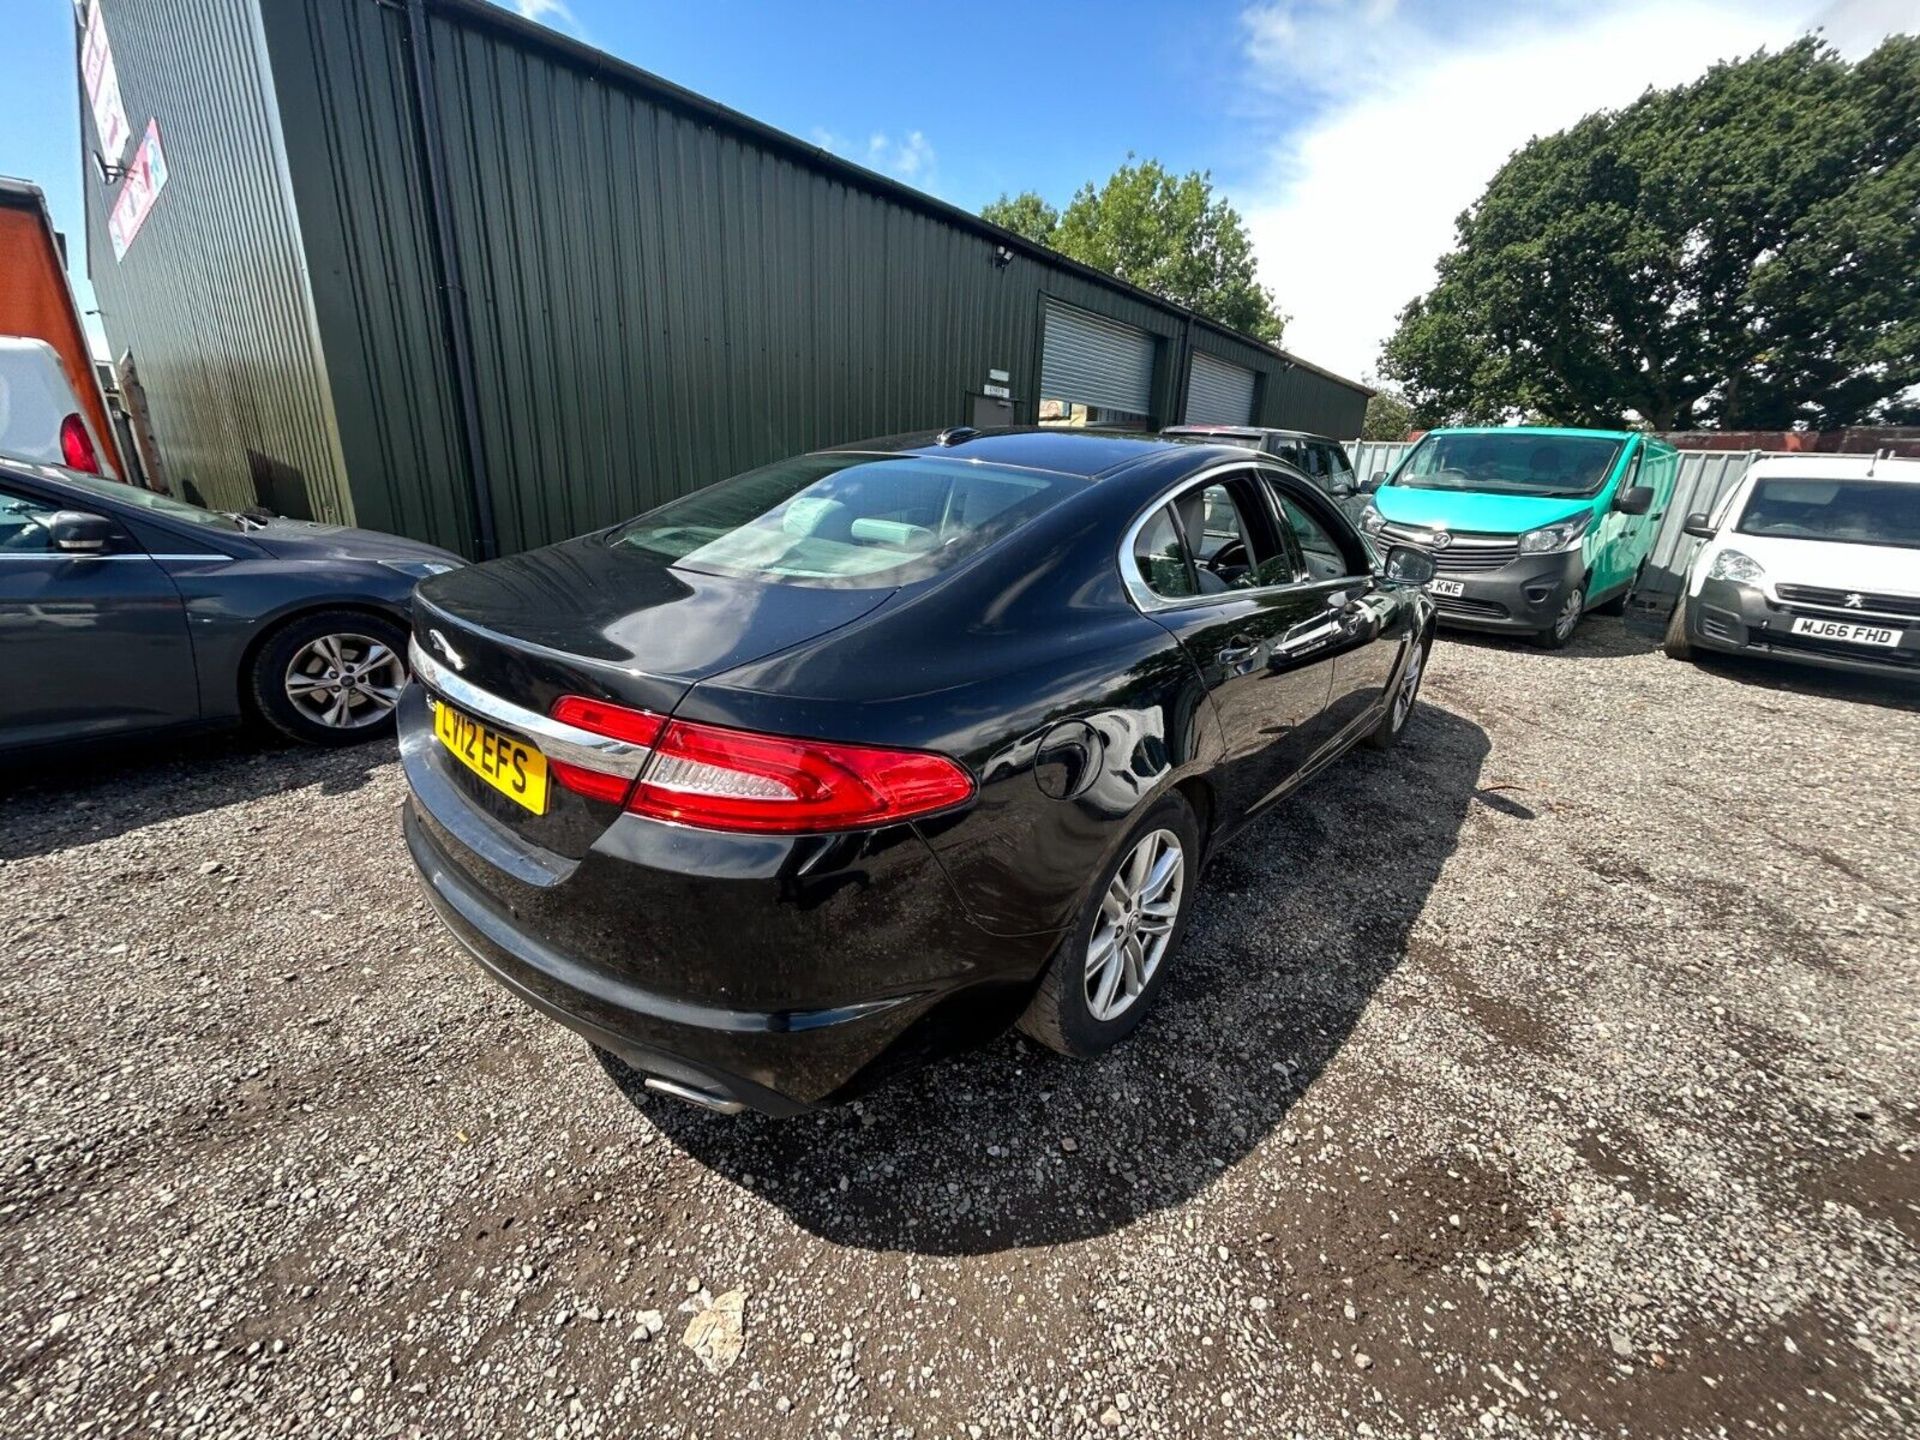 JAGUAR XF DIESEL SALOON 2.2D LUXURY 4DR AUTO 12 MONTHS MOT (NO VAT ON HAMMER) - IN DAILY USE - Image 14 of 19